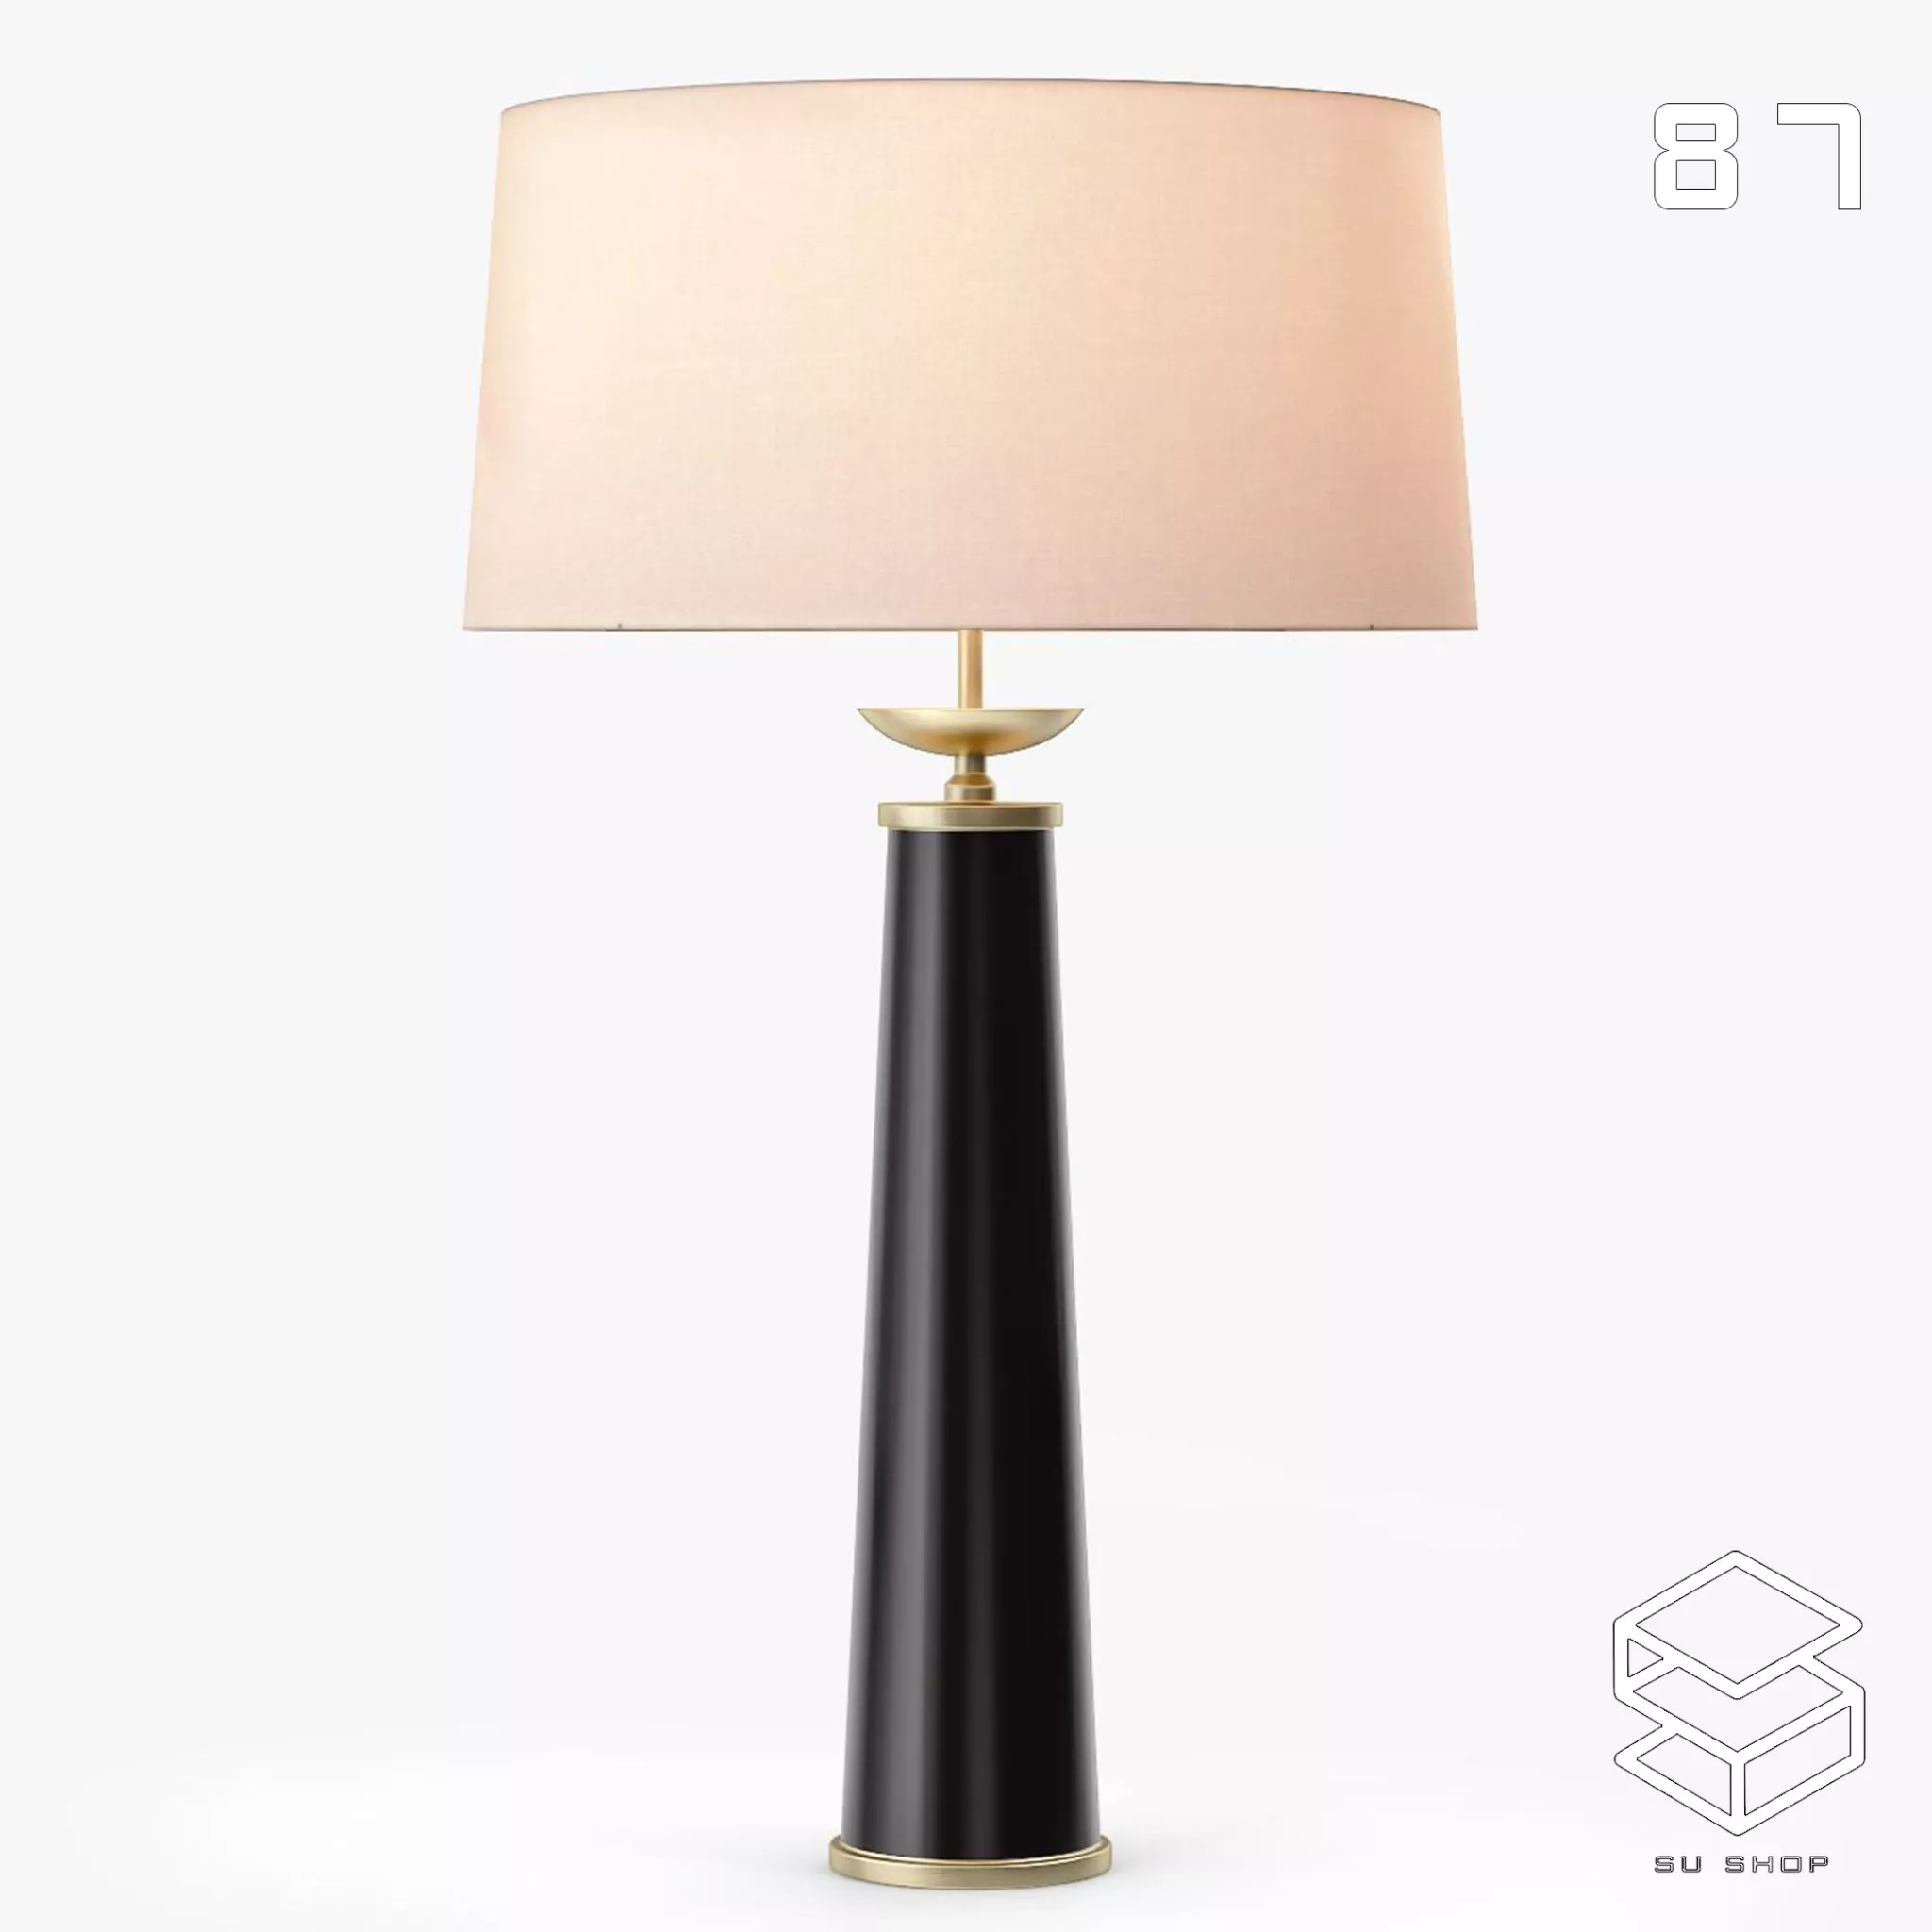 MODERN TABLE LAMP - SKETCHUP 3D MODEL - VRAY OR ENSCAPE - ID14885